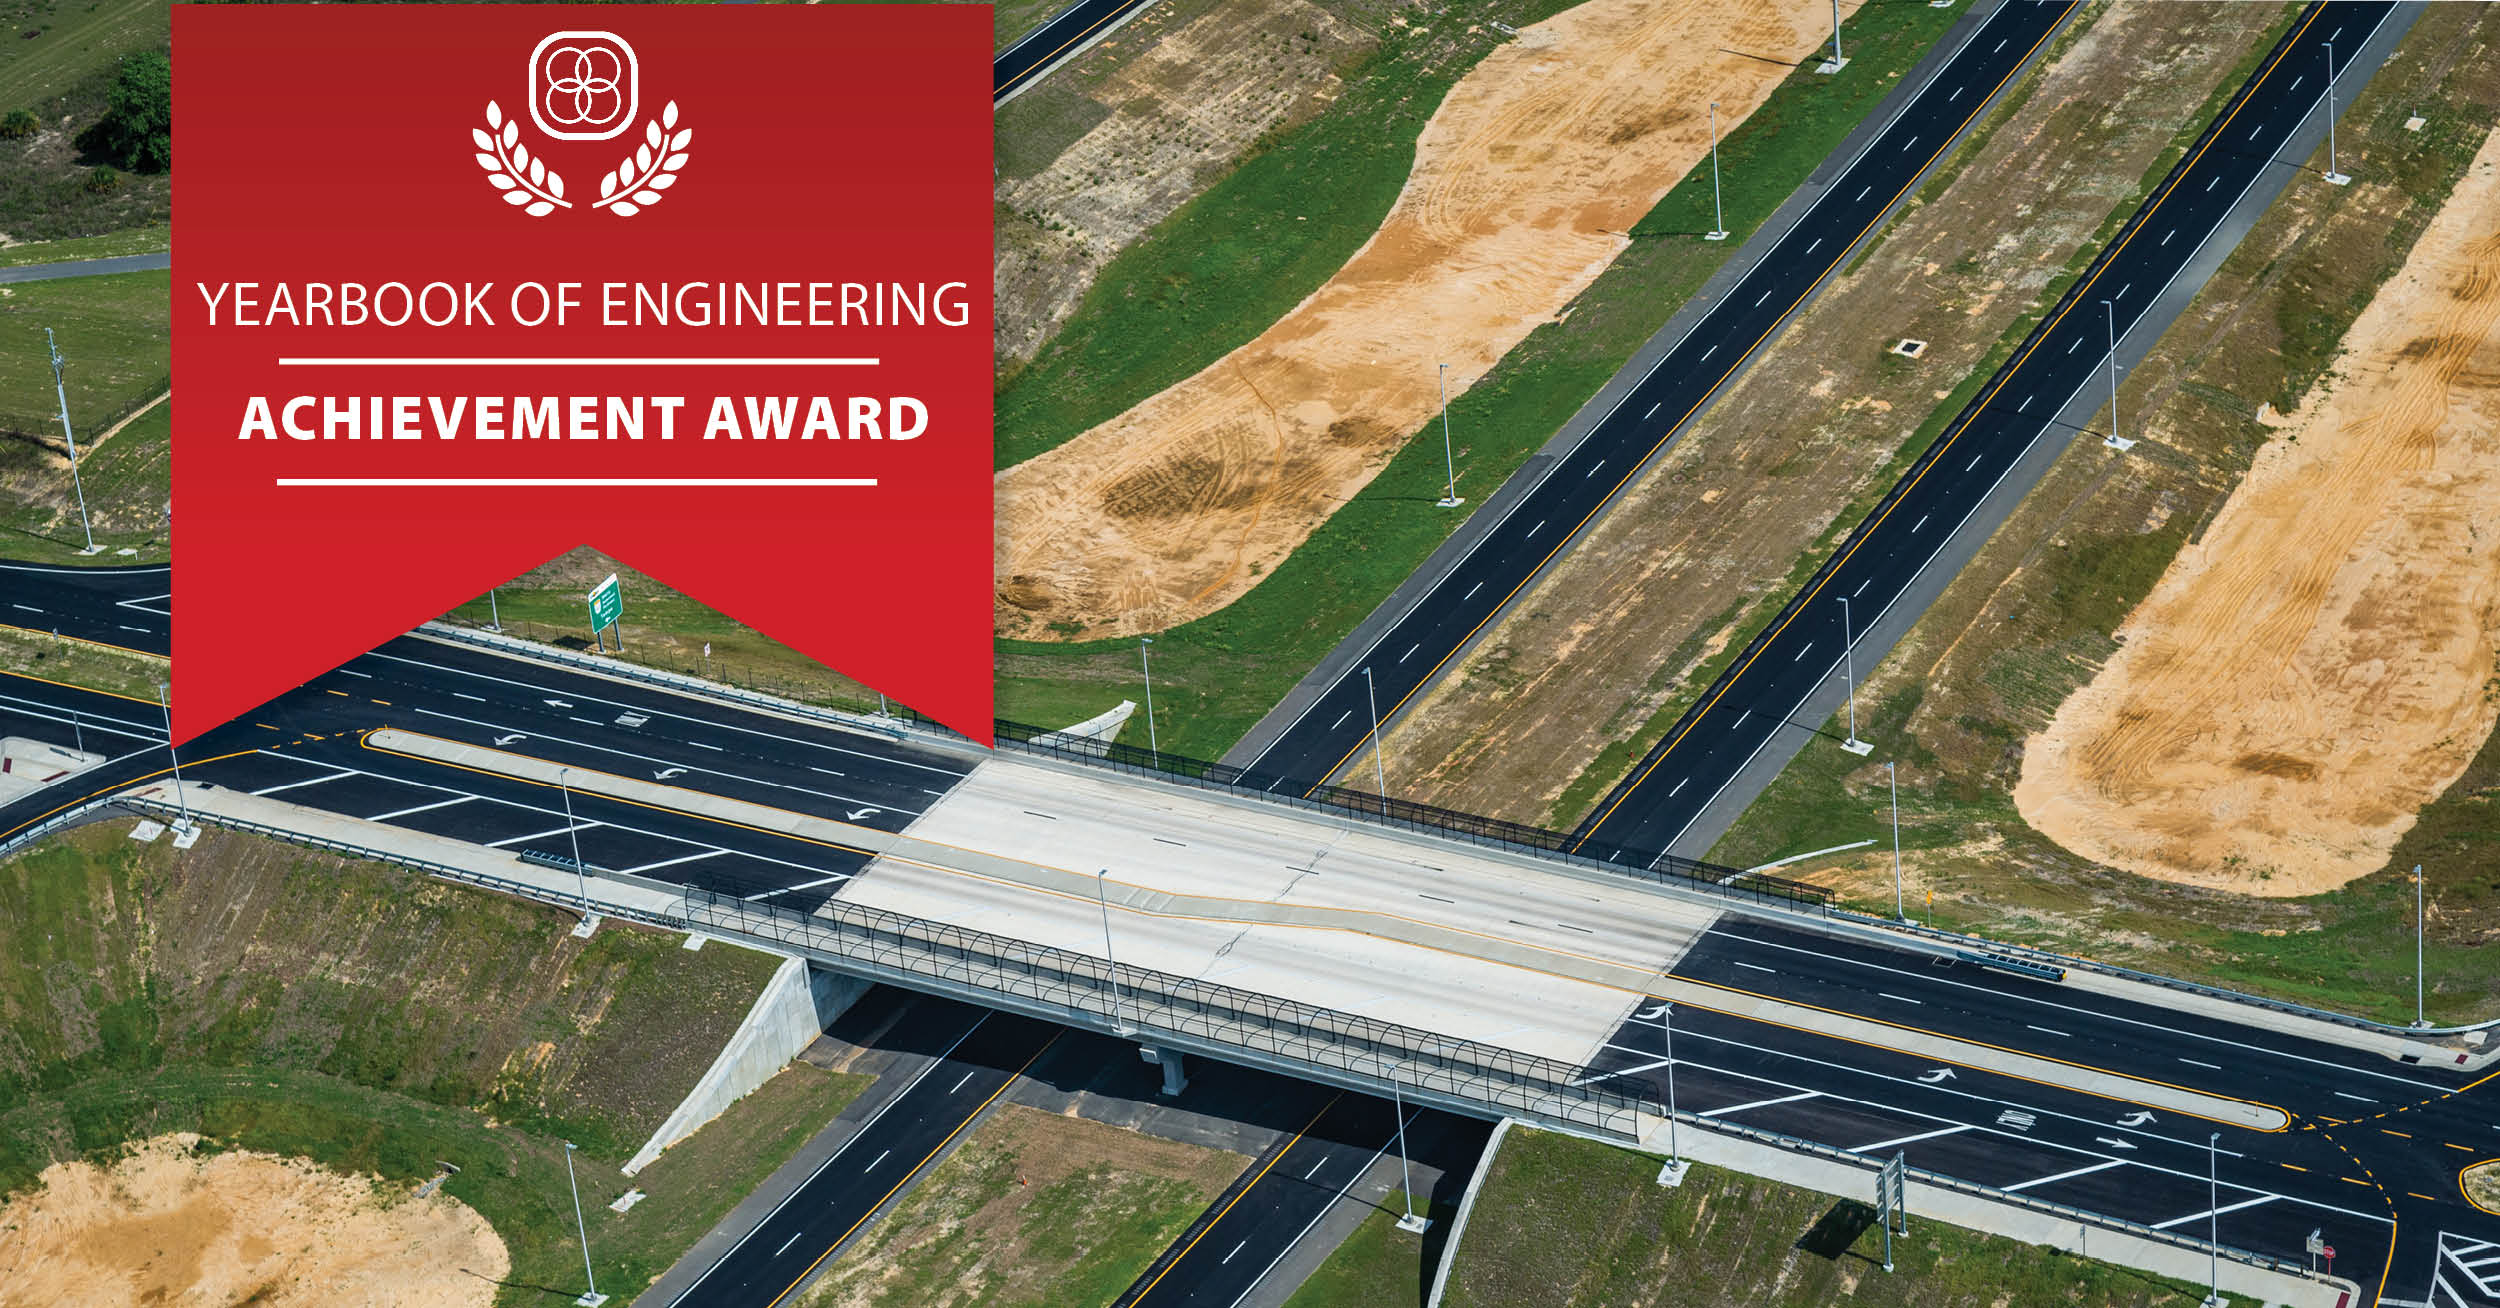 Suncoast Parkway 2 from US 98 to State Road 44 Project Wins 2022 Yearbook of Engineering Achievement Award